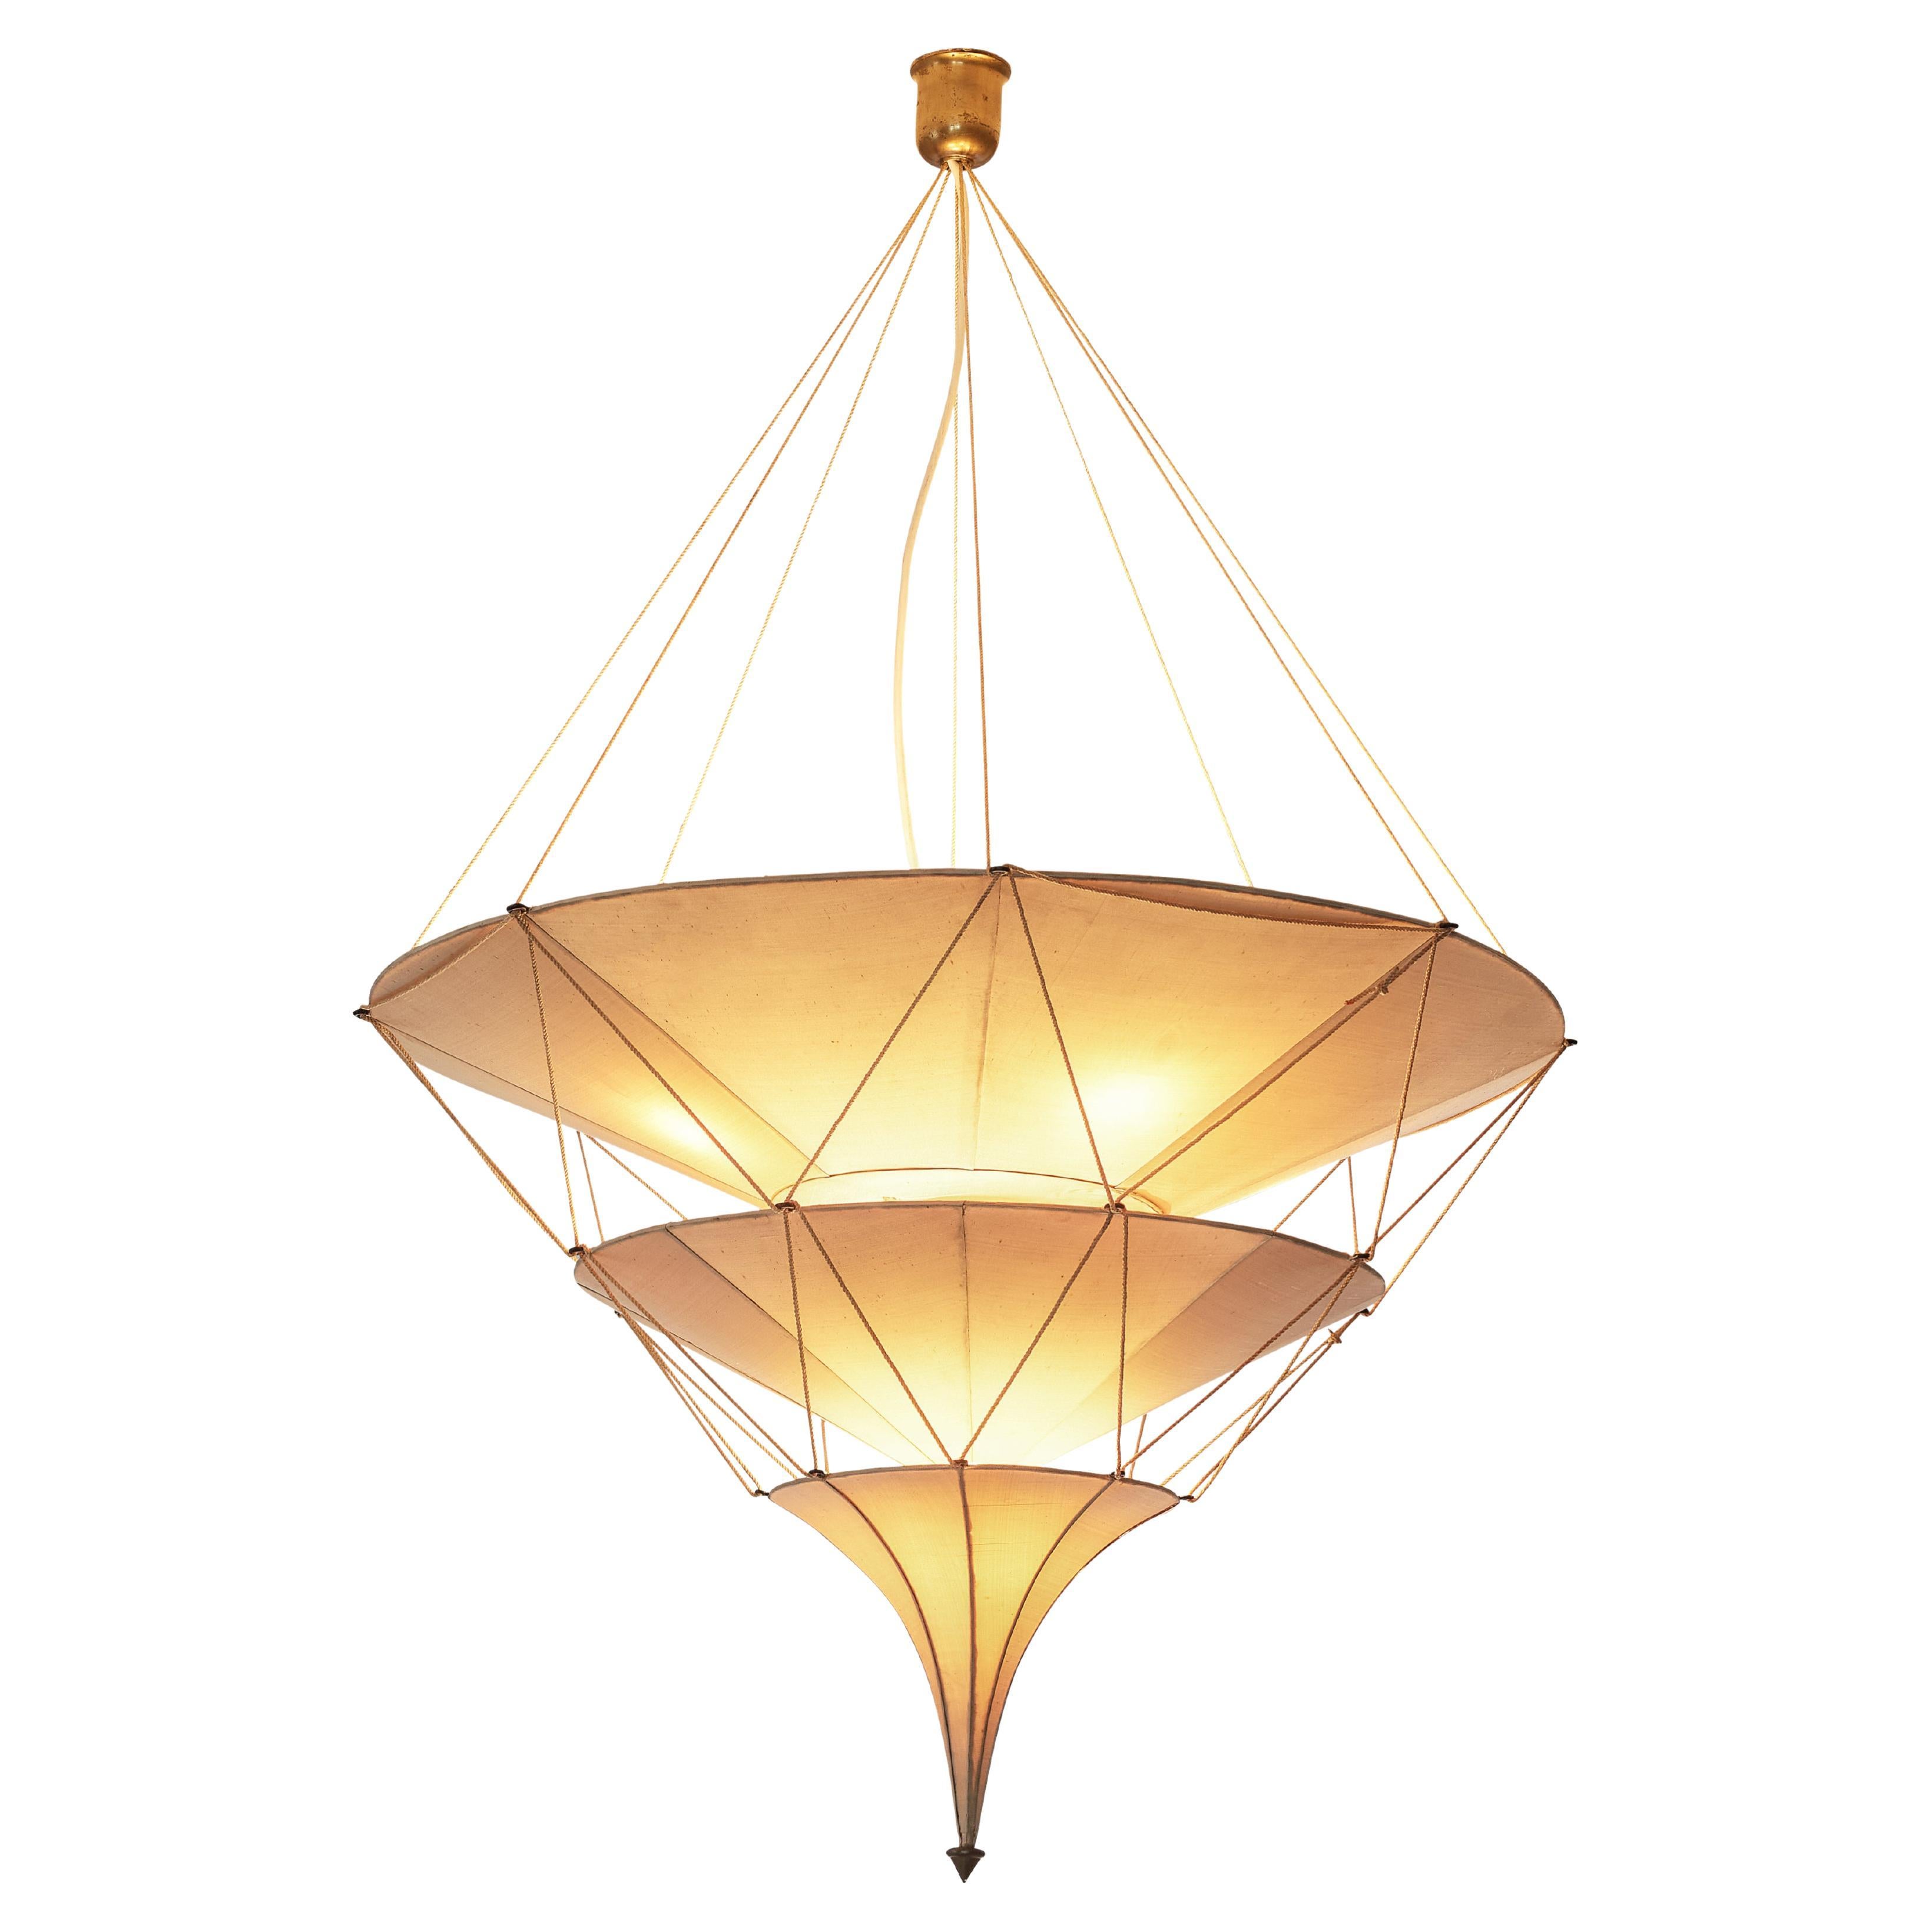 Delicate Mariano Fortuny ‘Icaro’ Chandelier in Silk